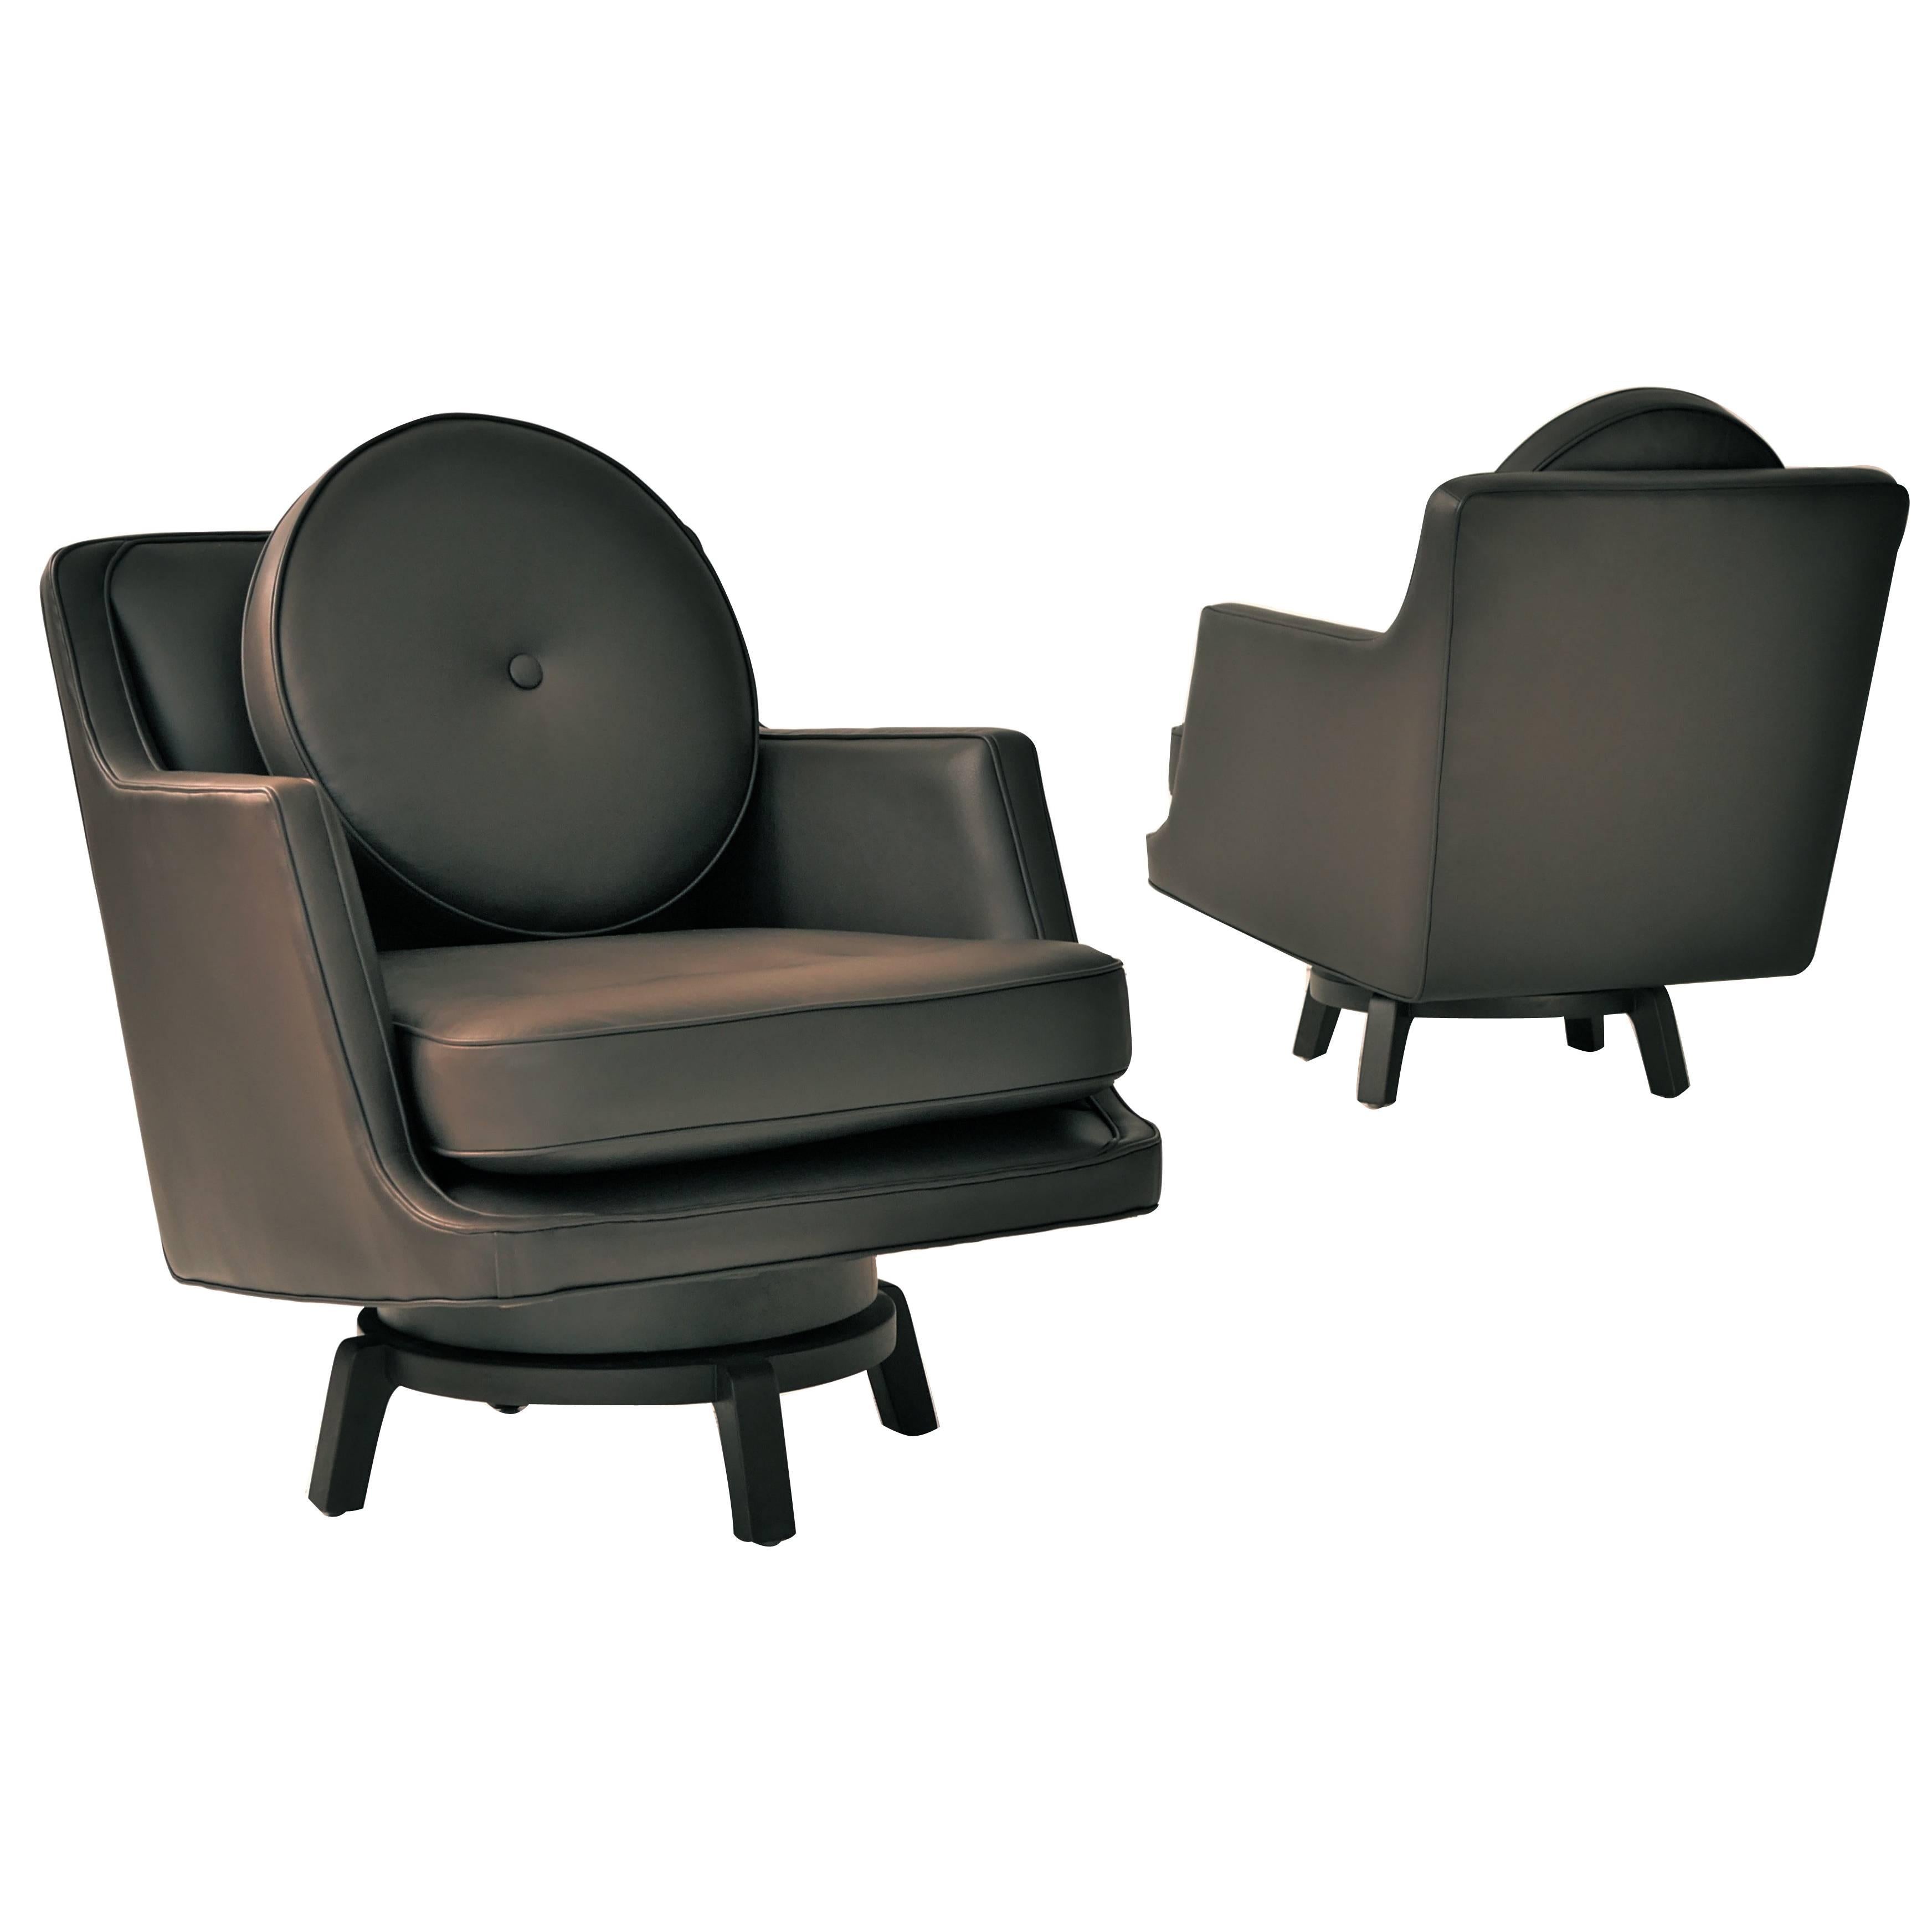 These beautiful Edward Wormley brown leather swivel lounge chairs have reupholstered in a spinney beck dark chocolate brown leather. Dunbar model #5609.